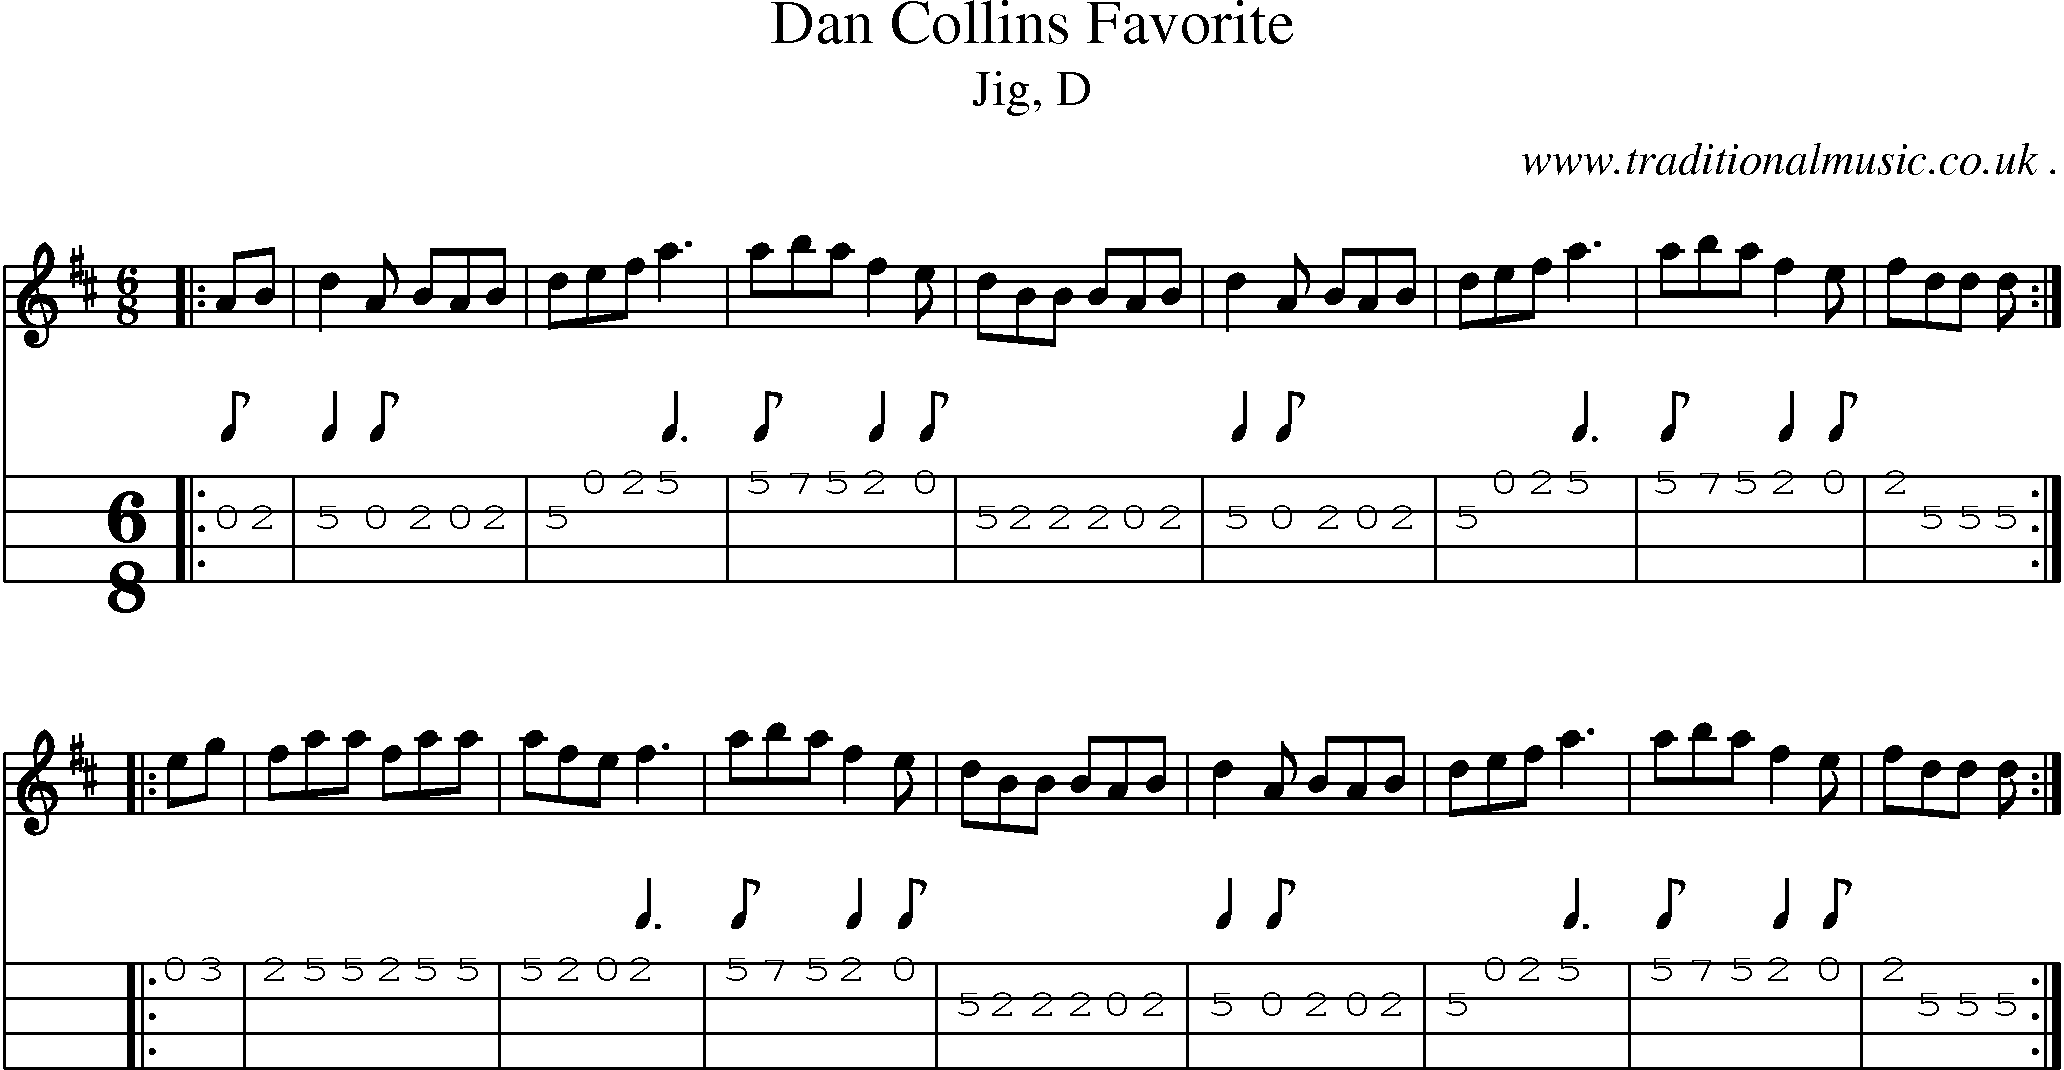 Sheet-music  score, Chords and Mandolin Tabs for Dan Collins Favorite